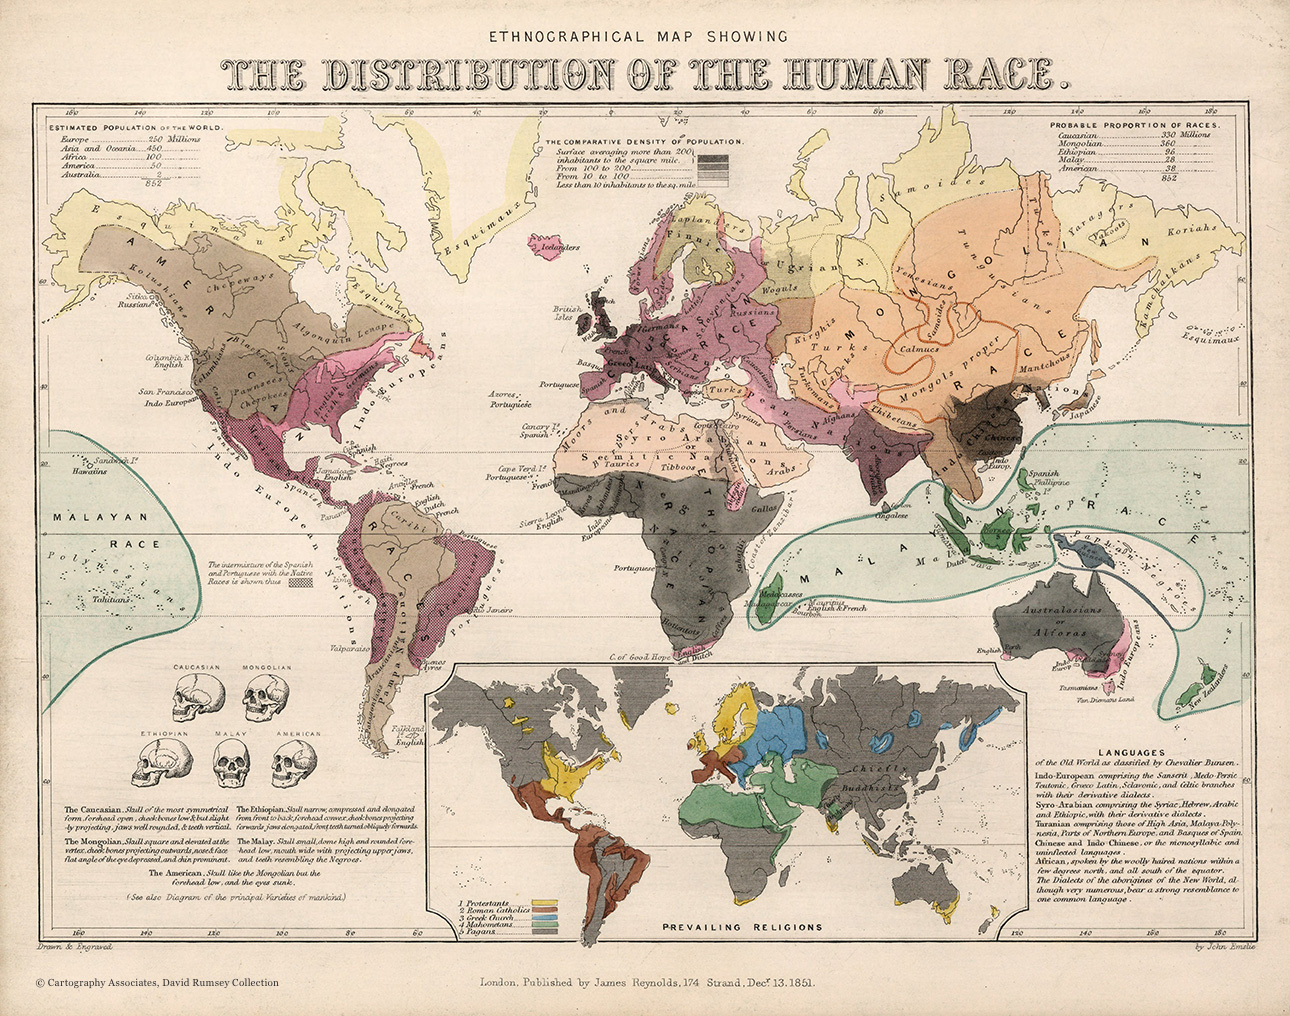 Ethnographical-map-showing-the-distribution-of-the-human-race